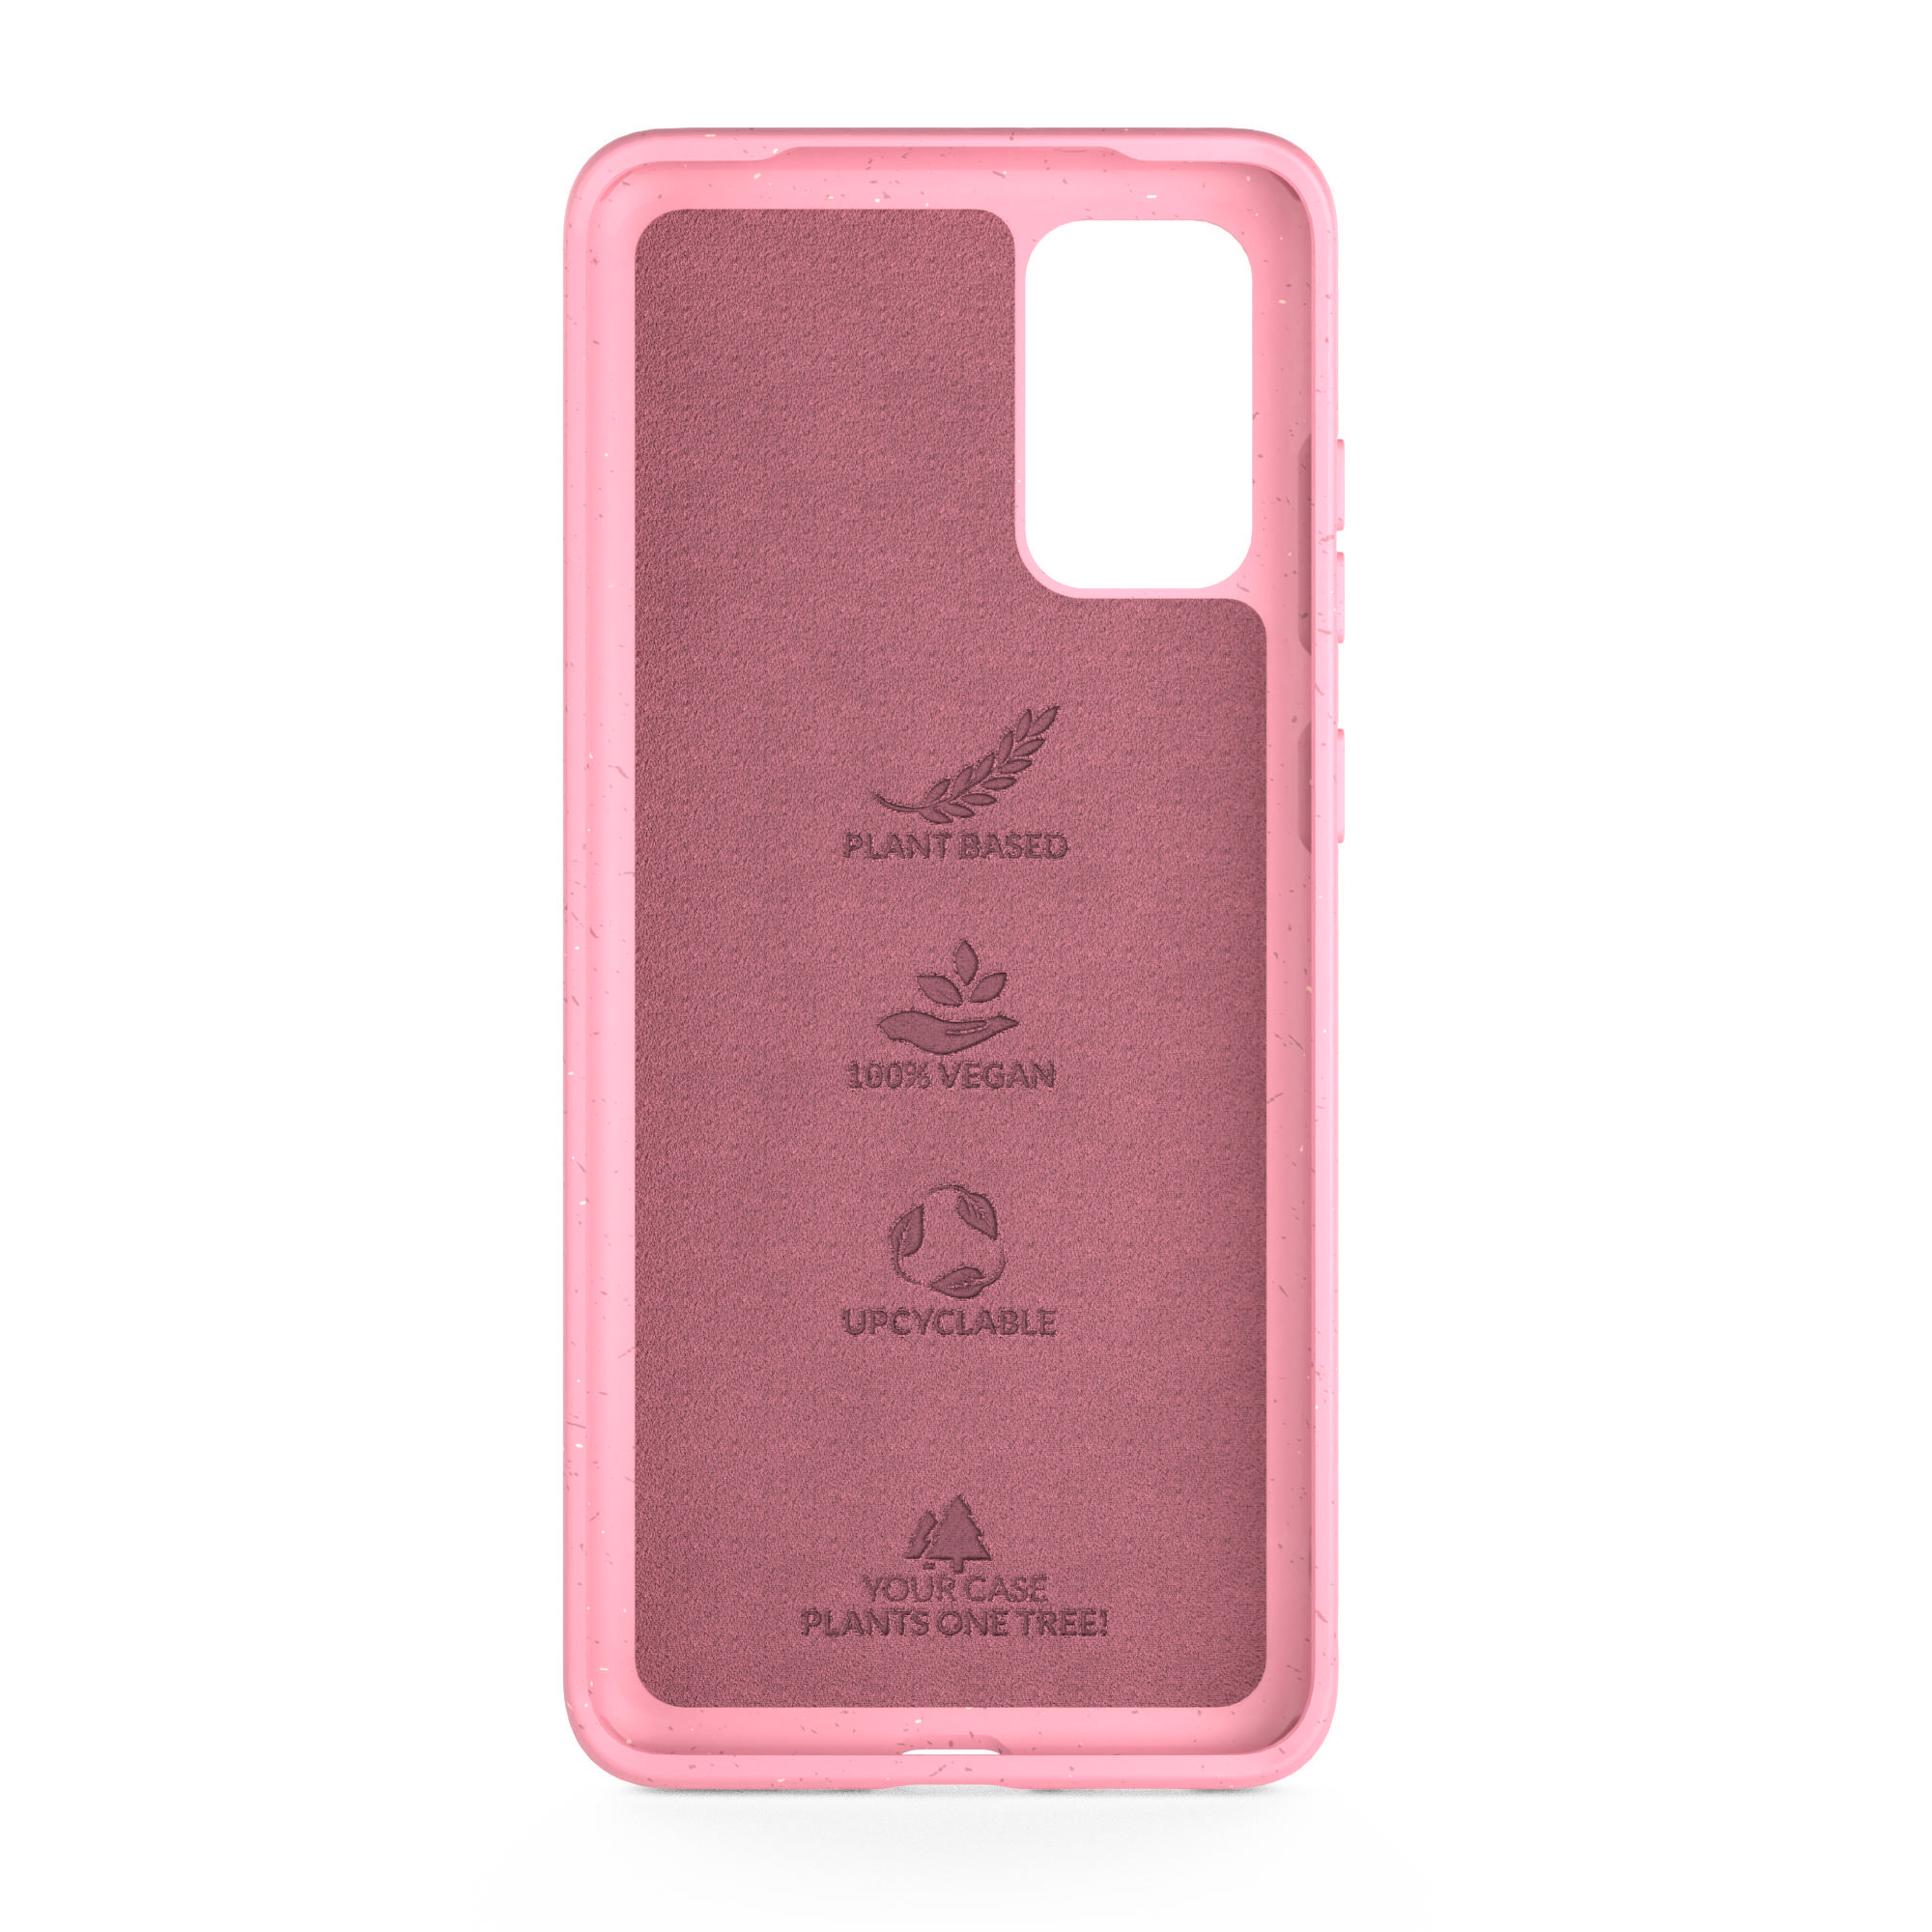 WOODCESSORIES Bio Case Antimicrobial, Backcover, Samsung, Galaxy S20+, Pink